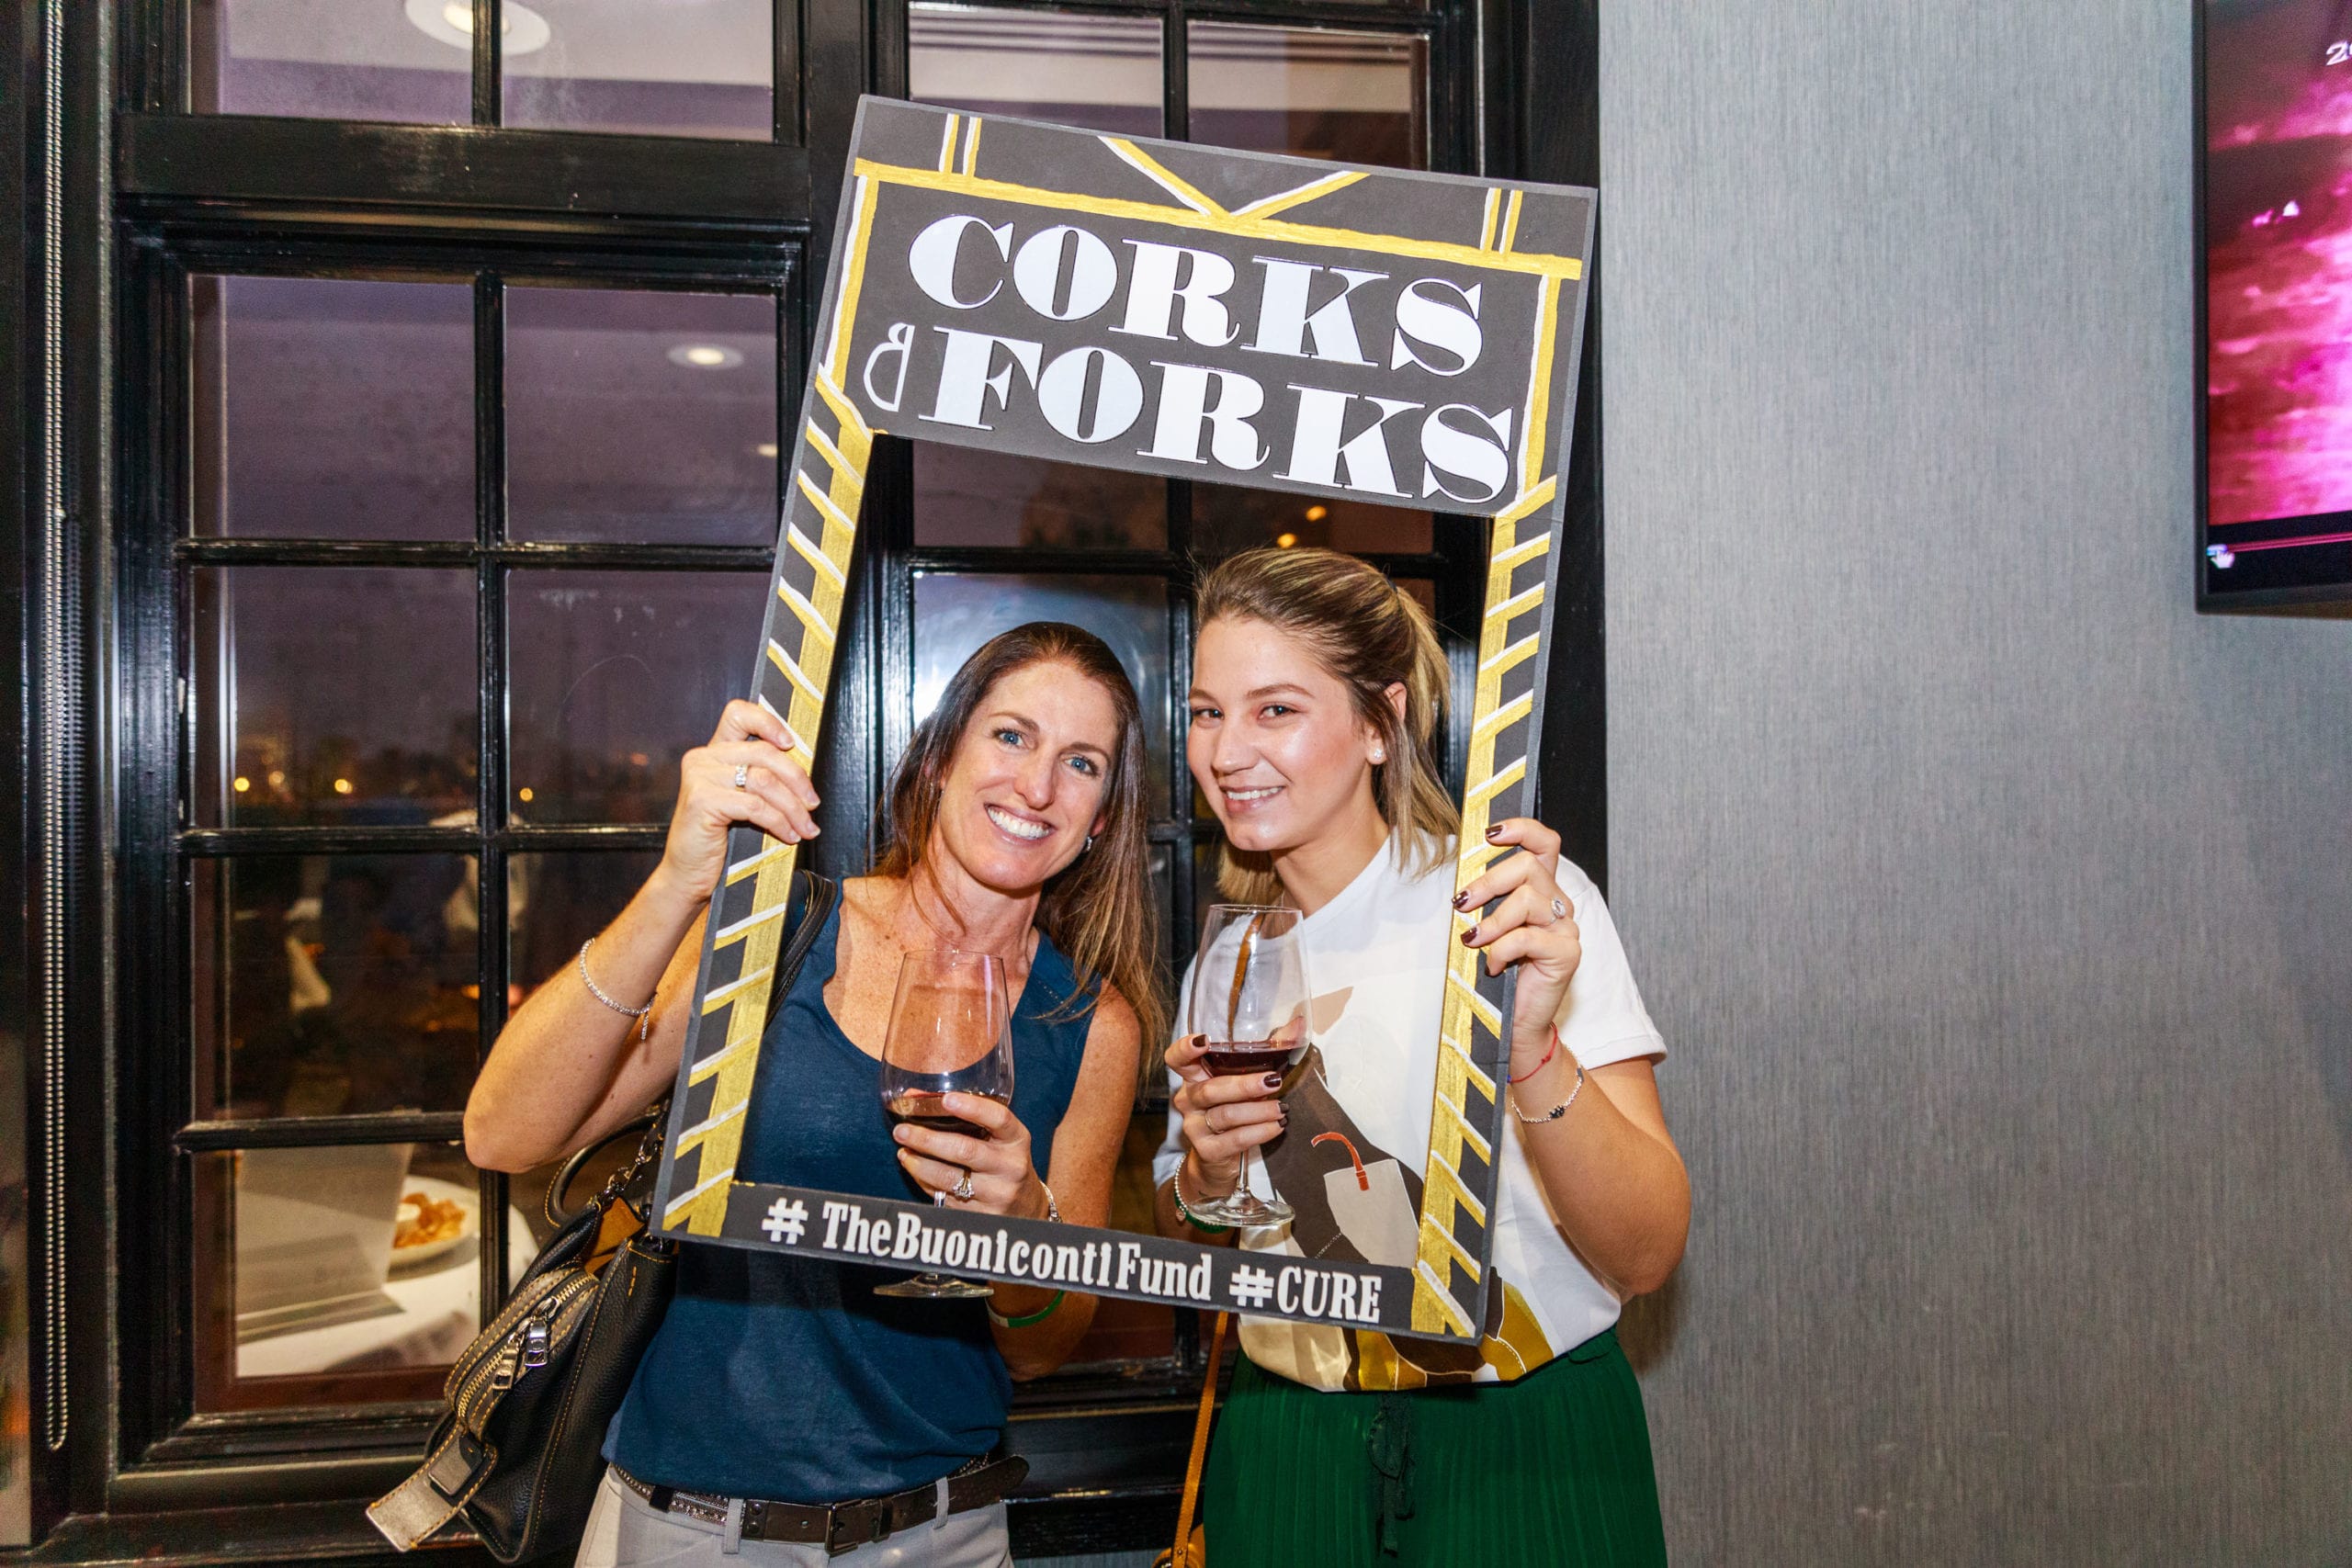 Miami Chapter's Corks and Forks